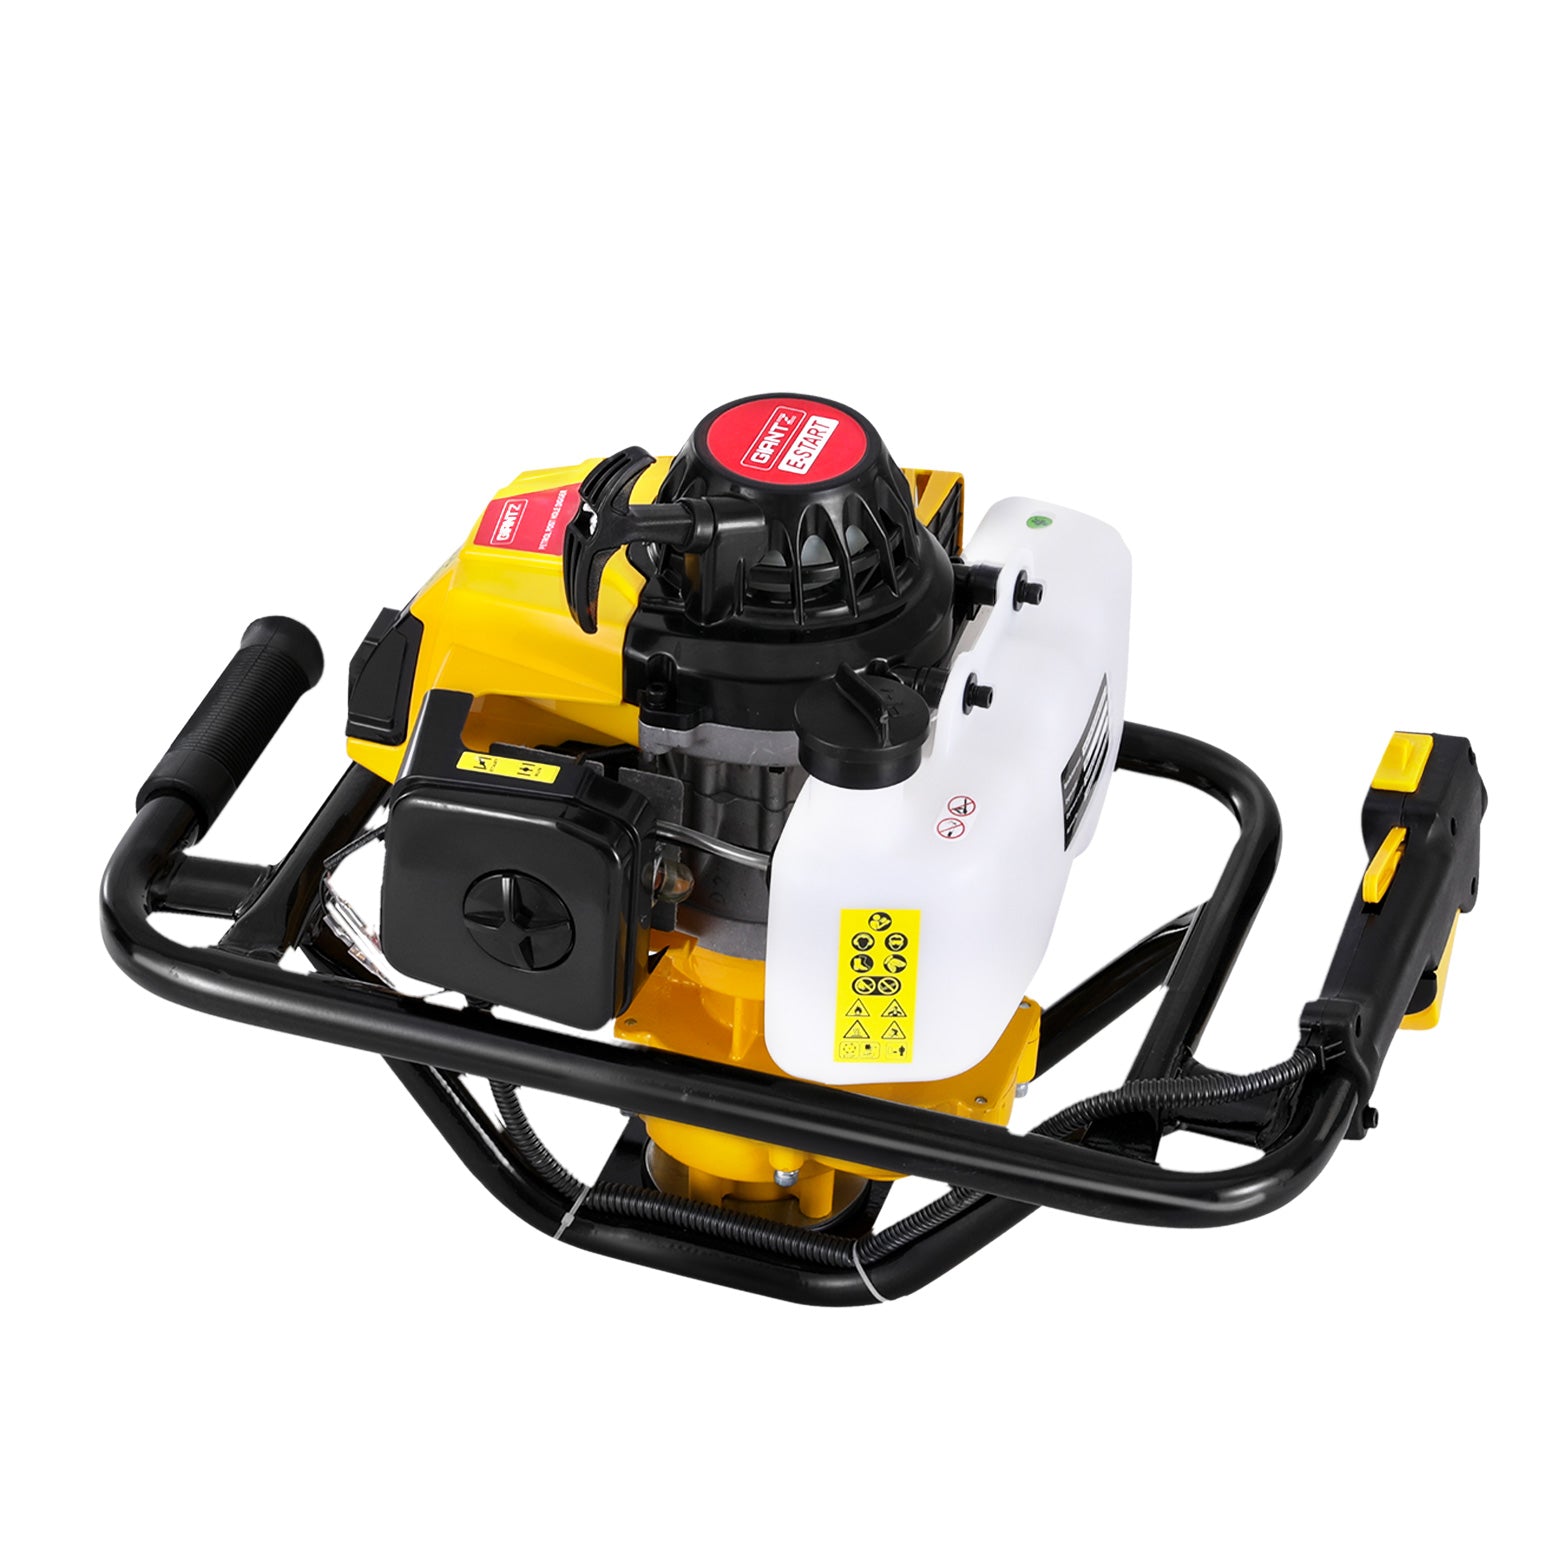 Giantz 82CC Post Hole Digger Motor Only Petrol Engine Yellow - SILBERSHELL